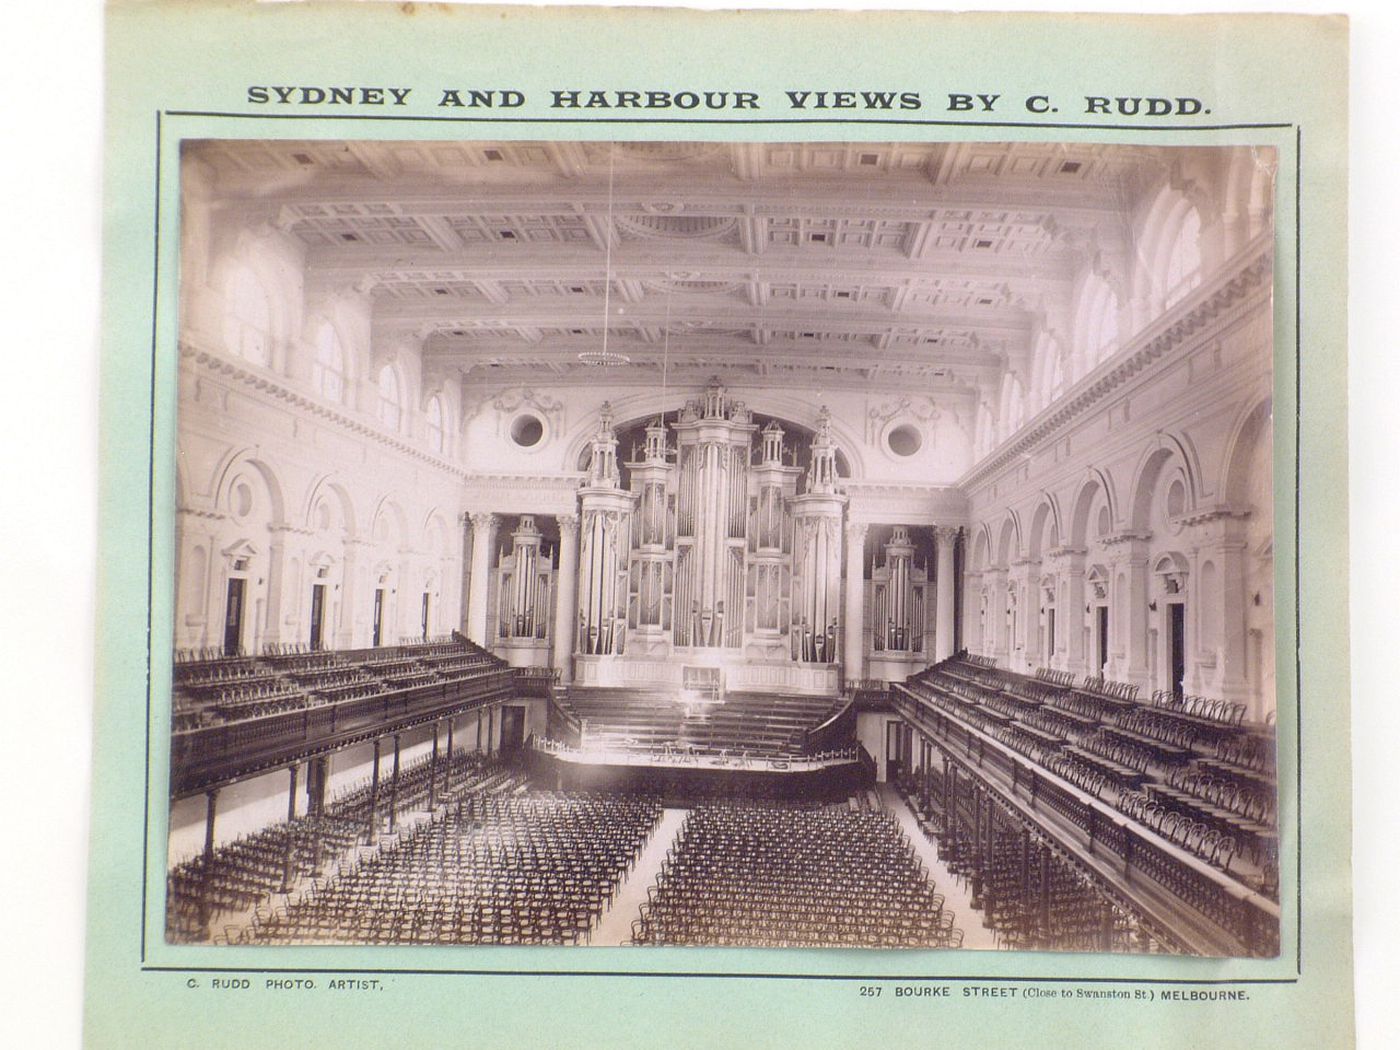 Interior view of a concert hall from the gallery showing the stage and the organ, Sydney [?], Australia